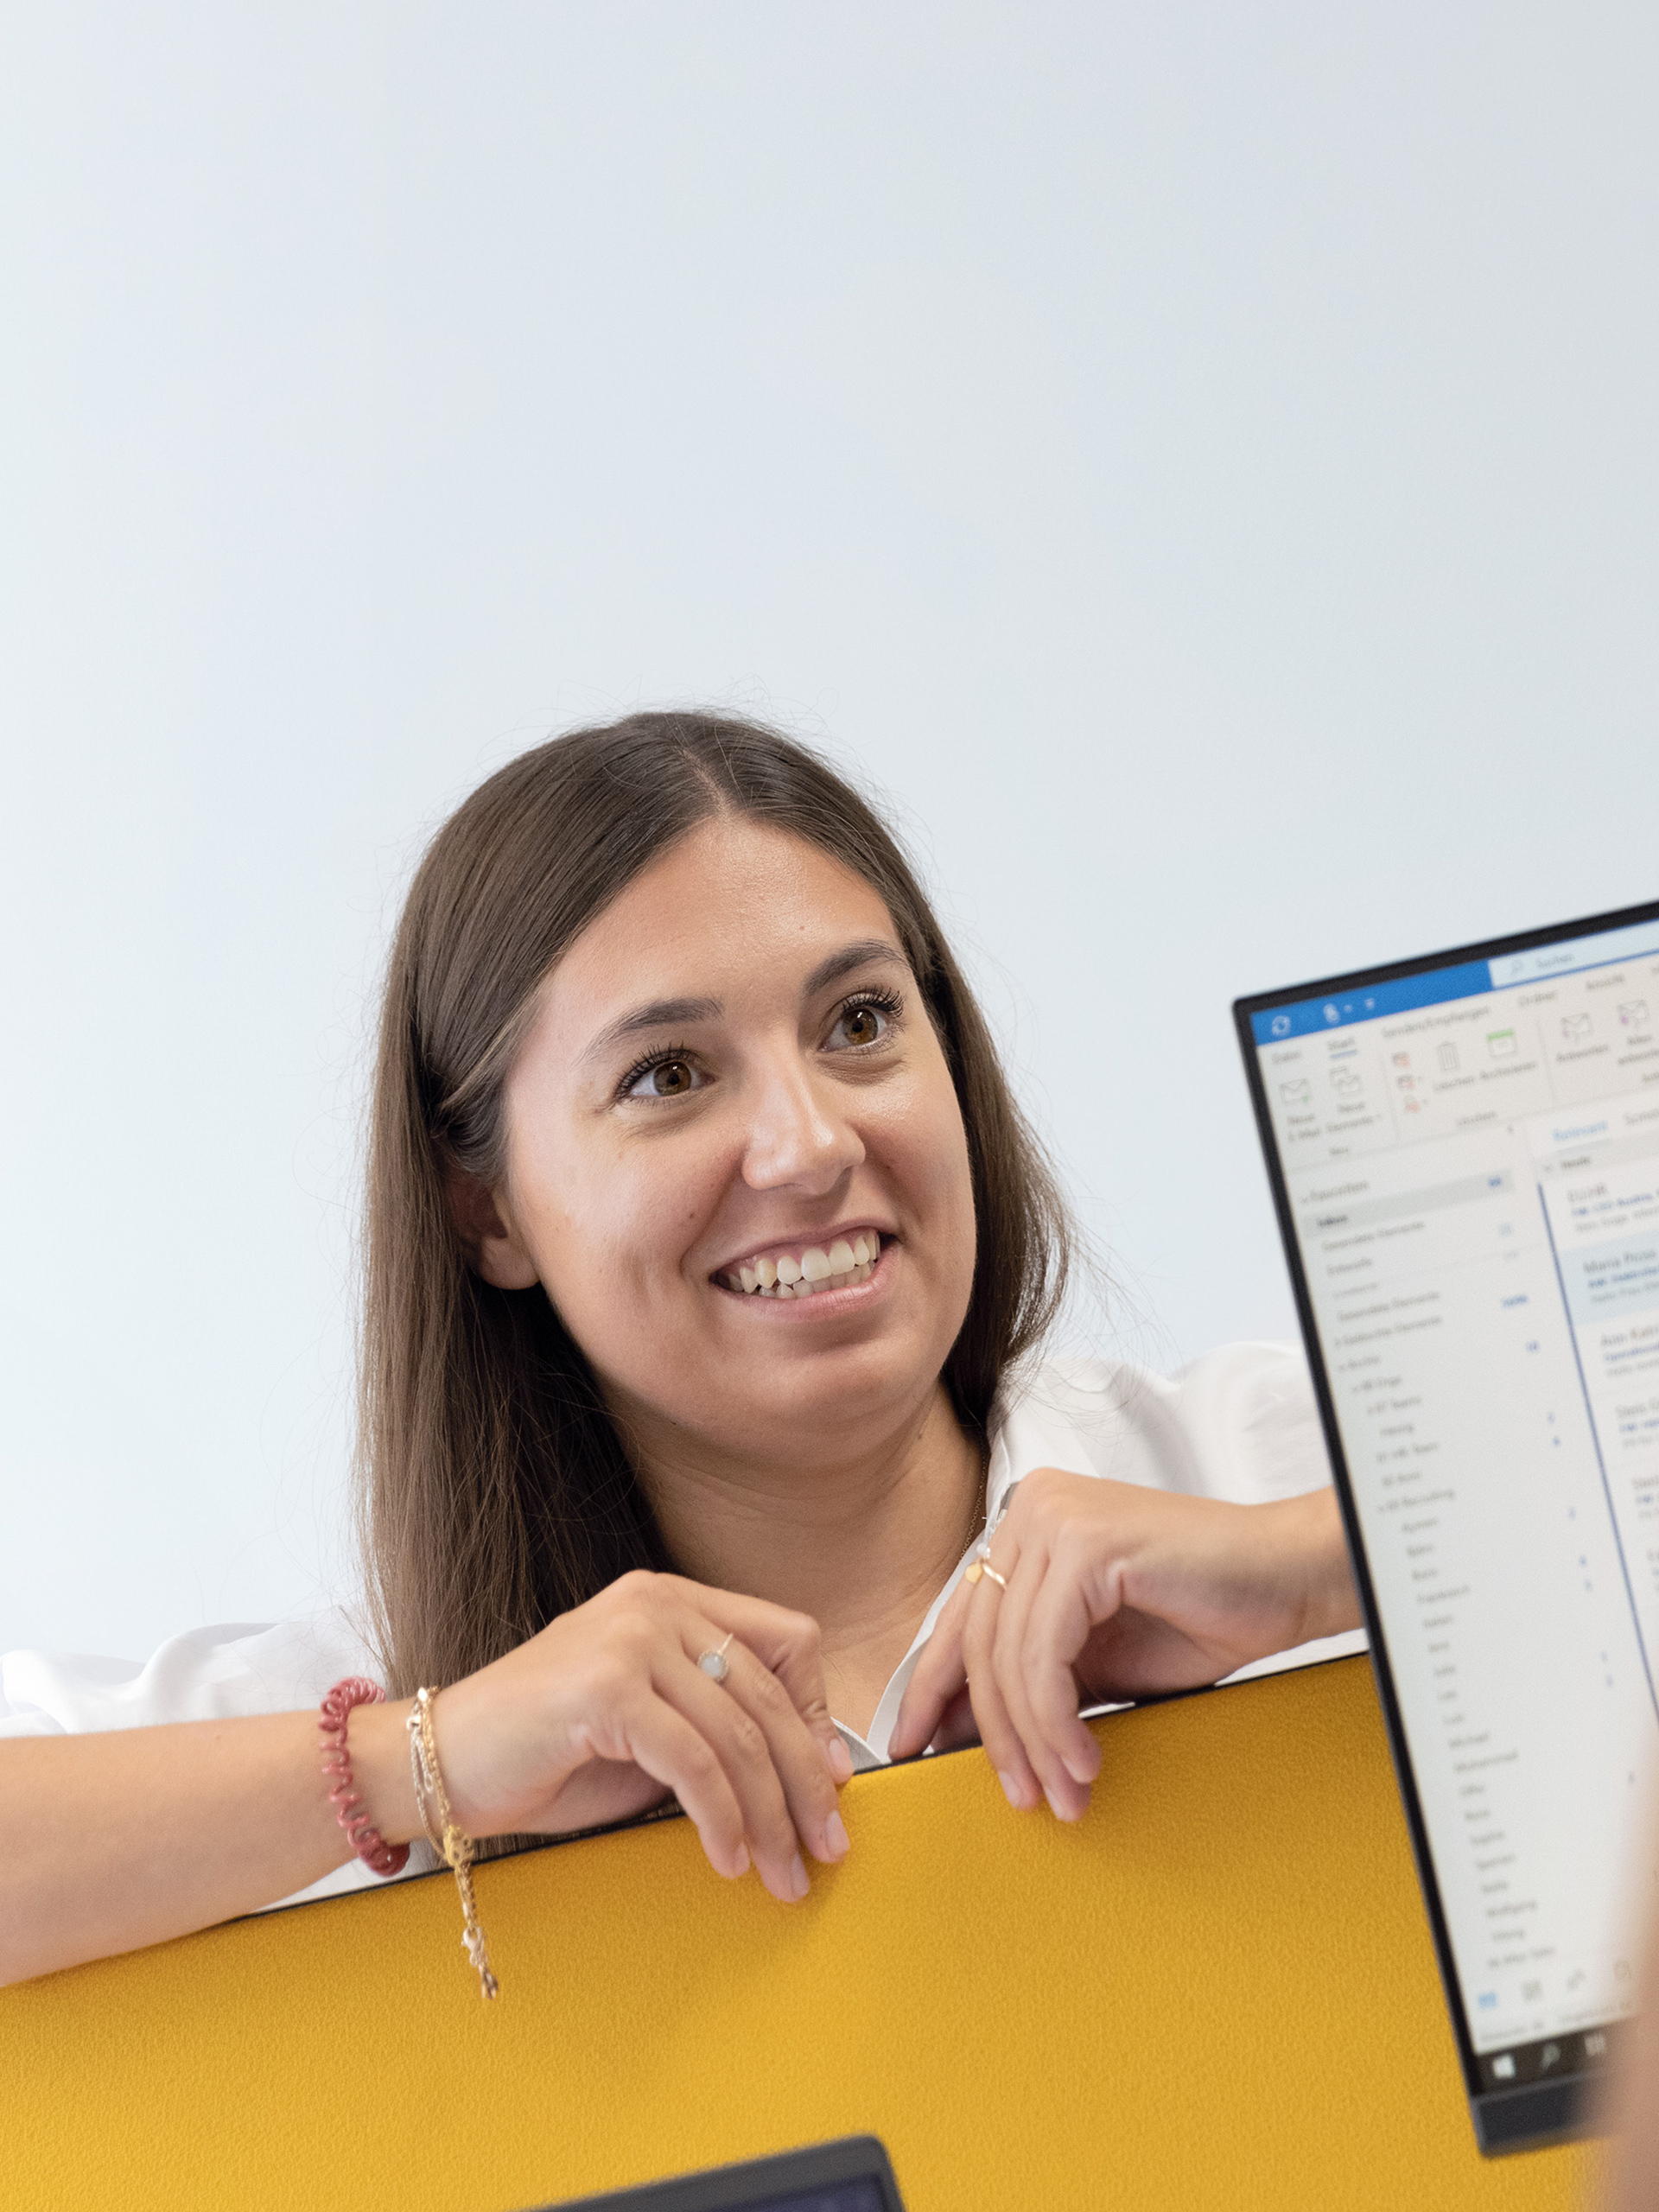 woman leaning over desk smiling